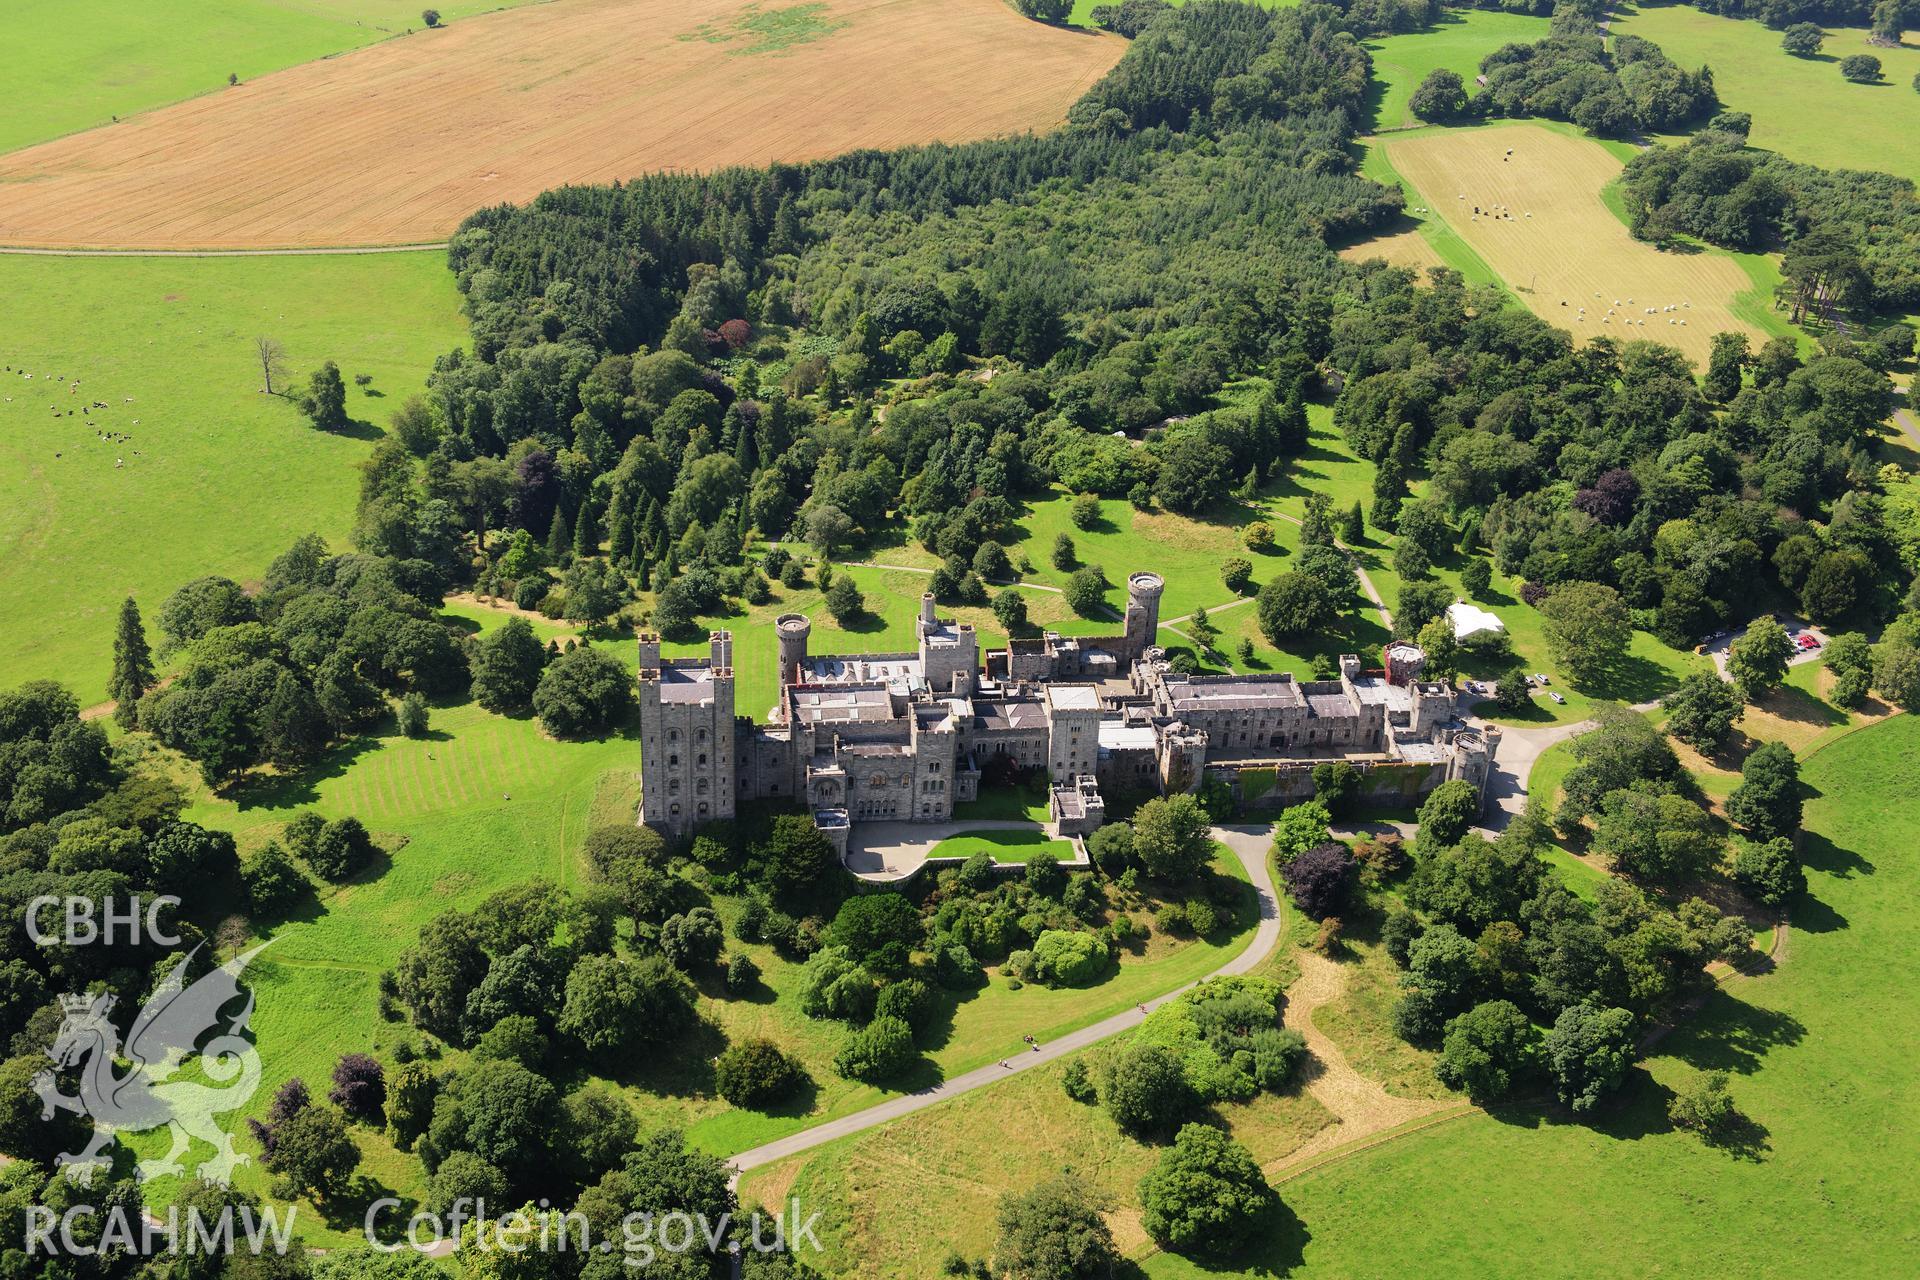 RCAHMW colour oblique photograph of Penrhyn Castle, viewed from the east. Taken by Toby Driver on 10/08/2012.